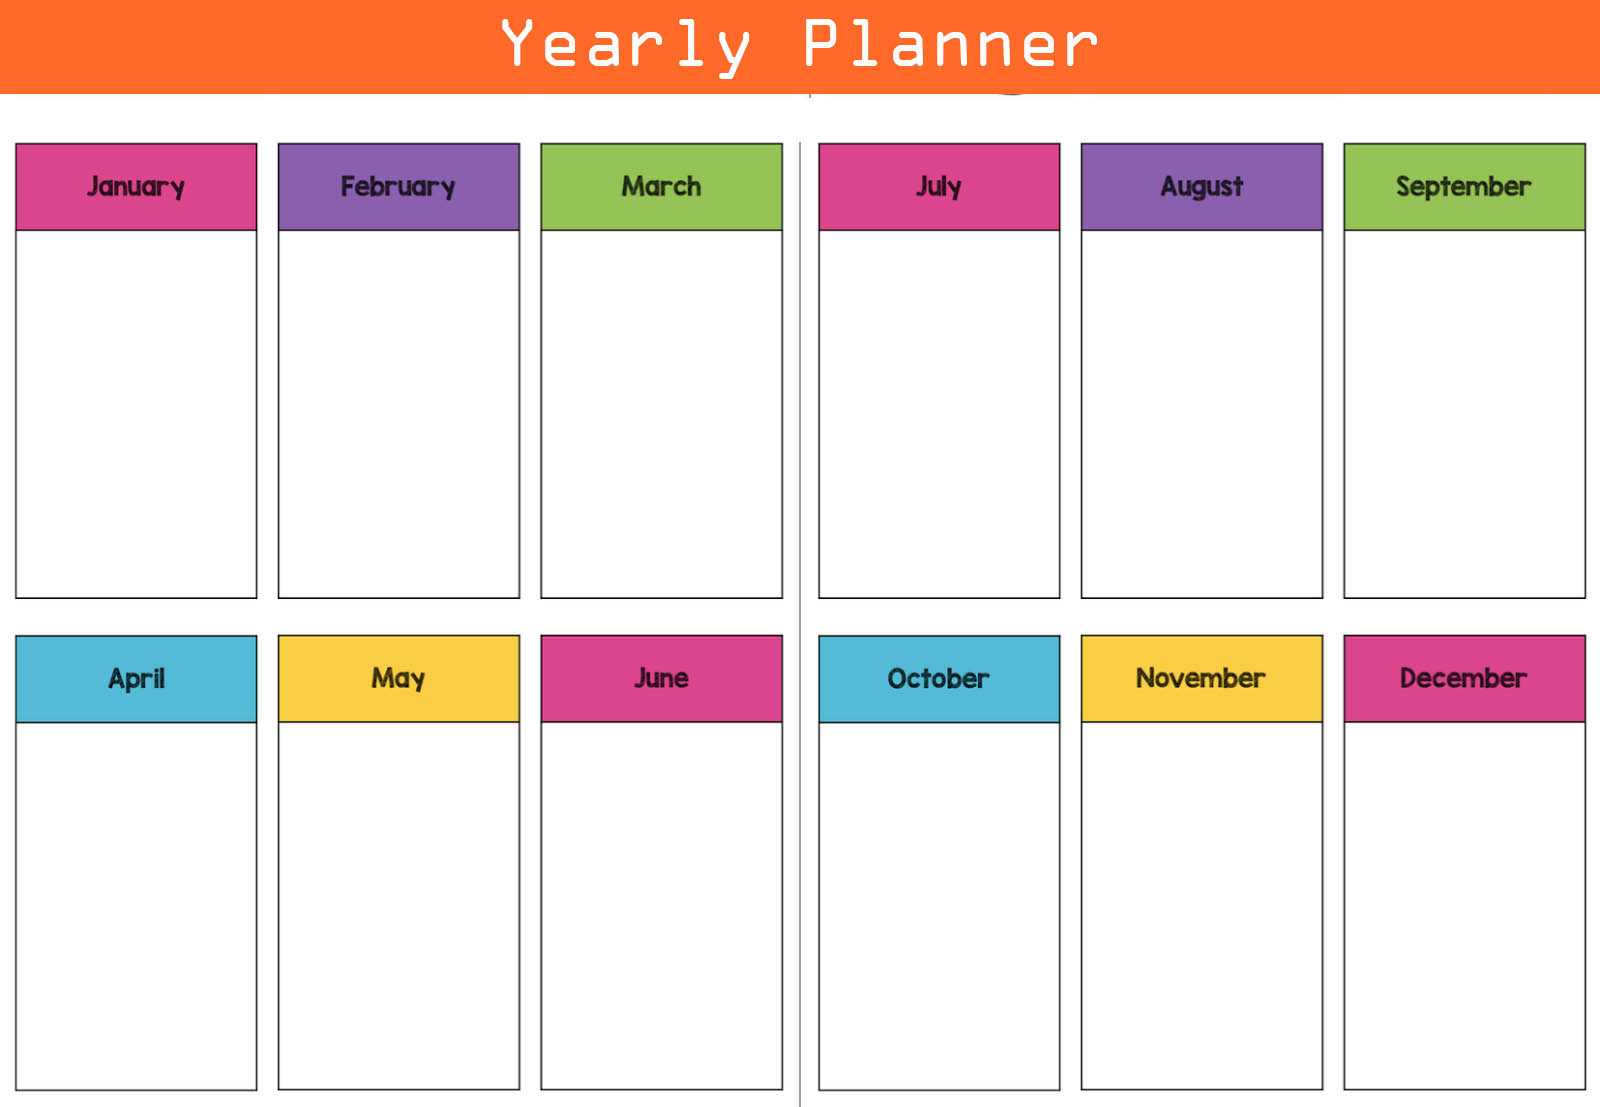 Yearly Planner Printable